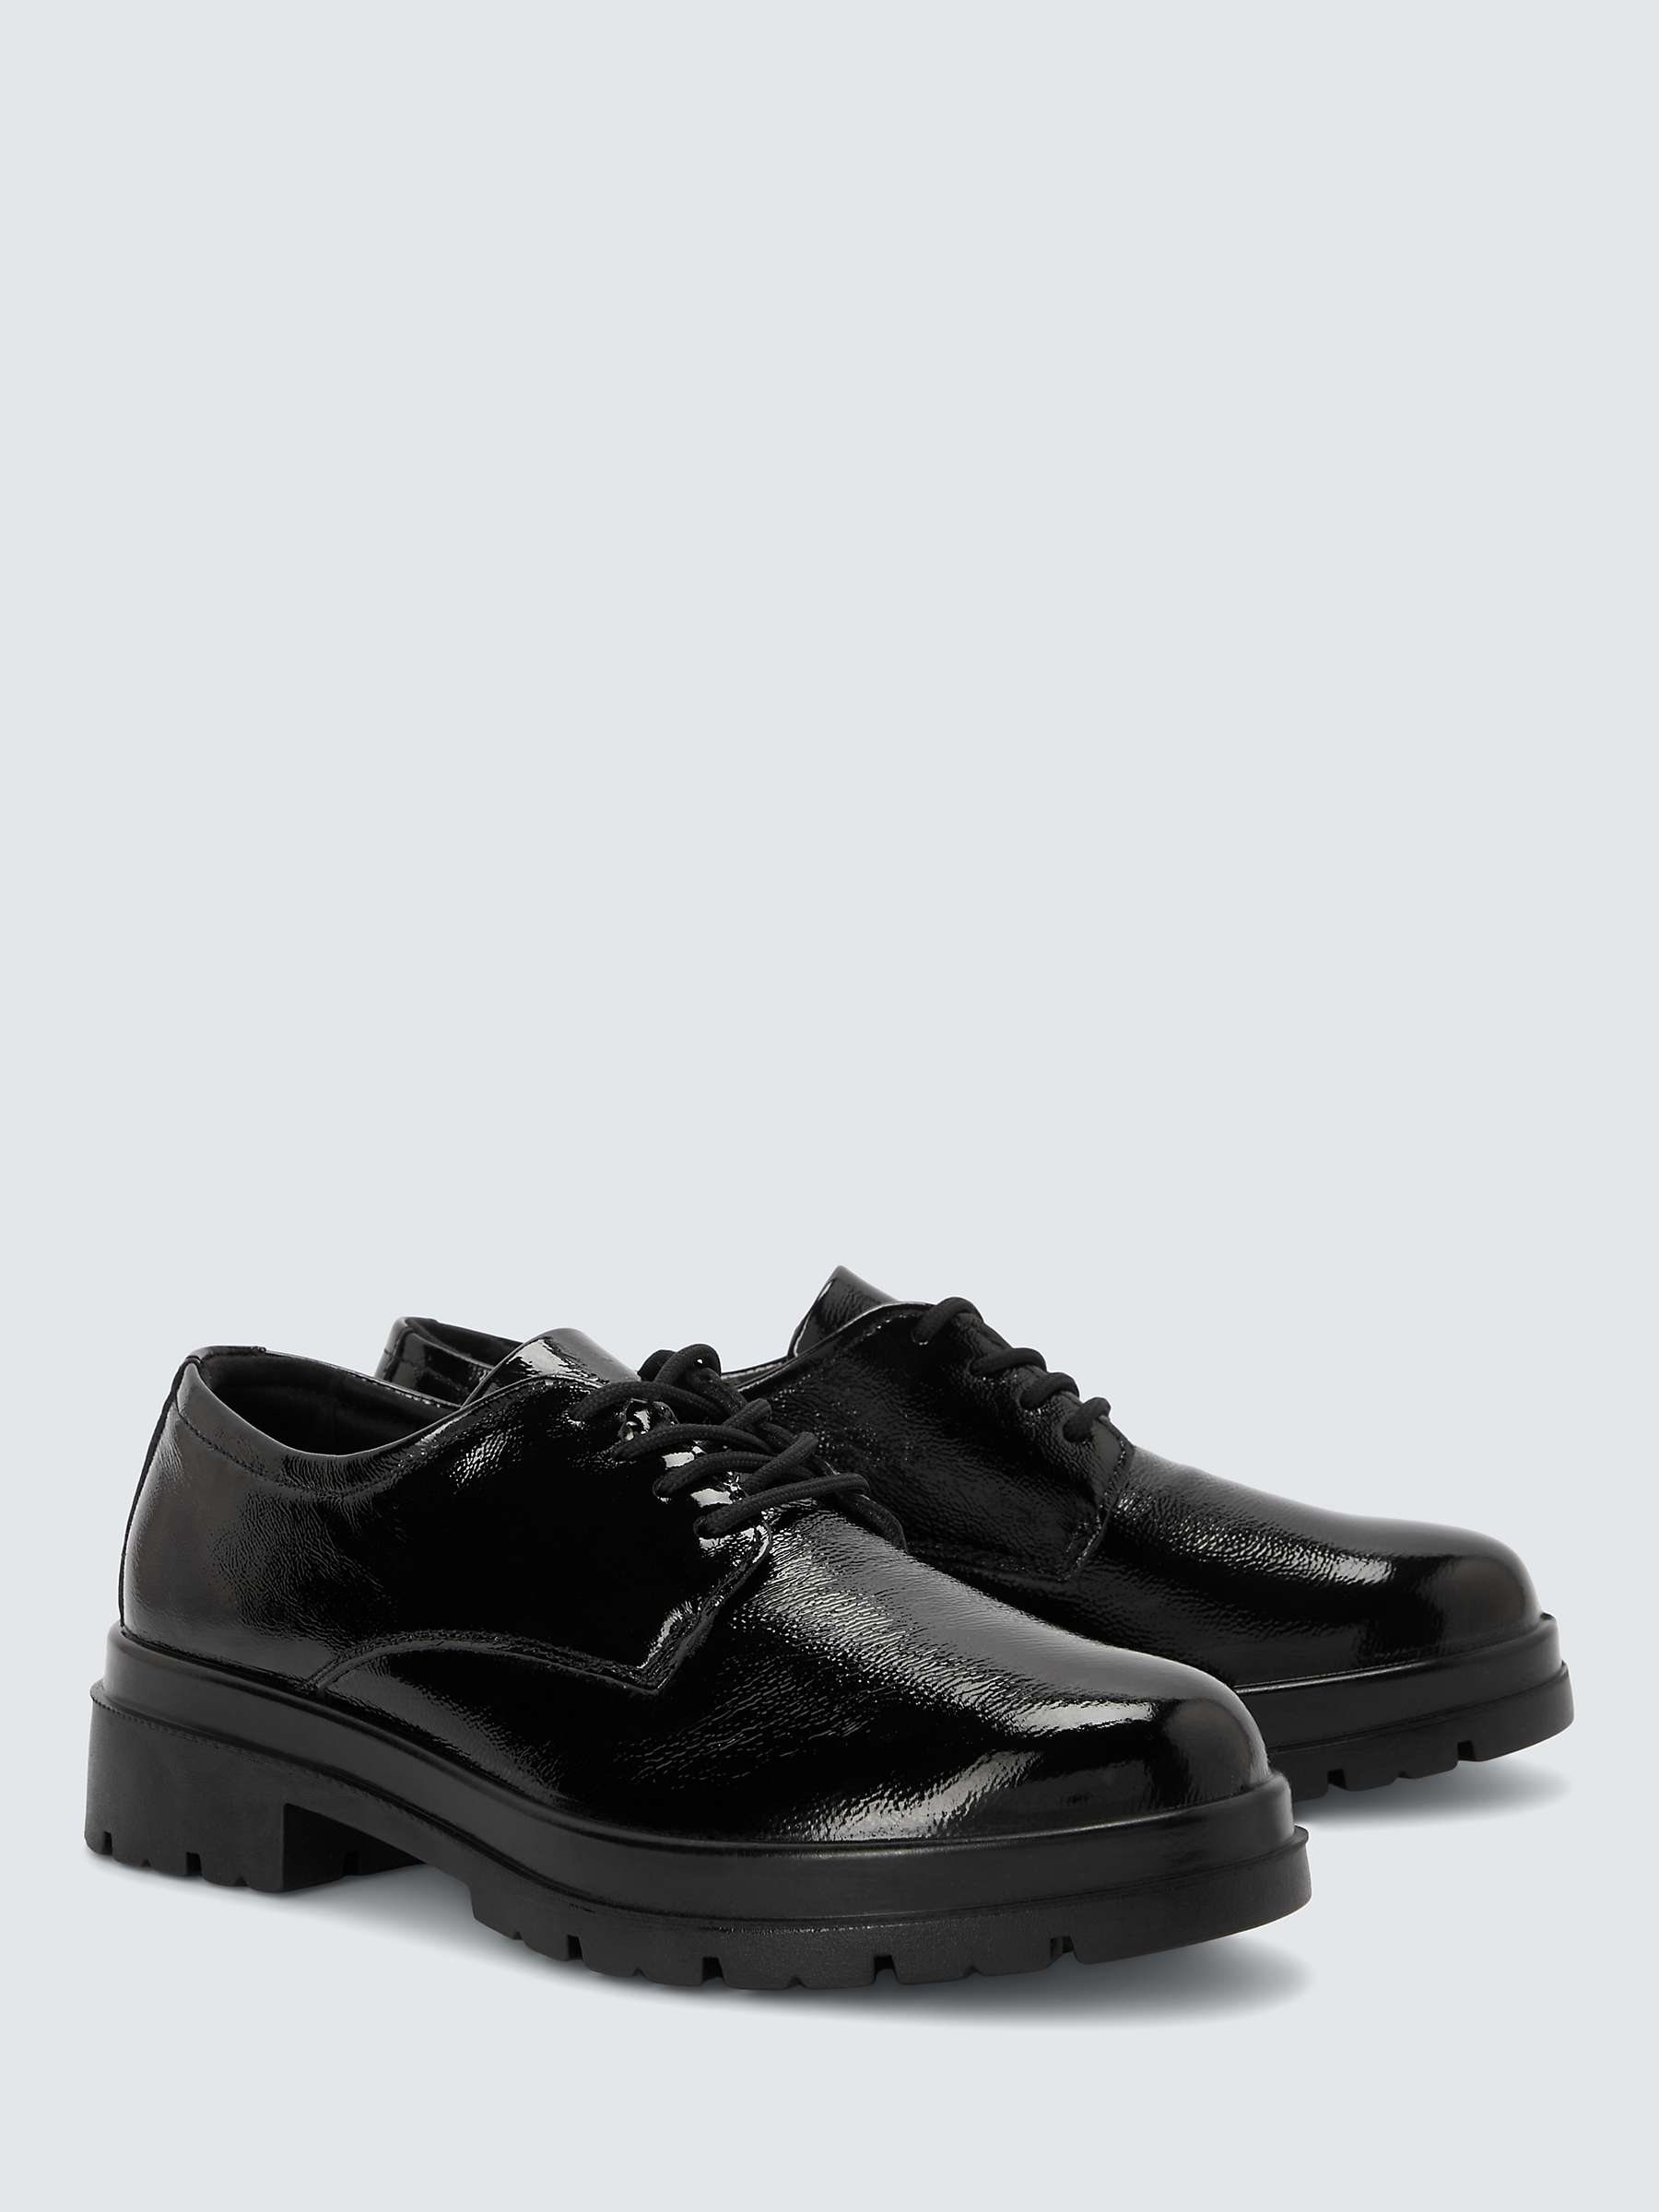 Buy John Lewis Fifie Leather Comfort Lace Up Oxford Shoes Online at johnlewis.com